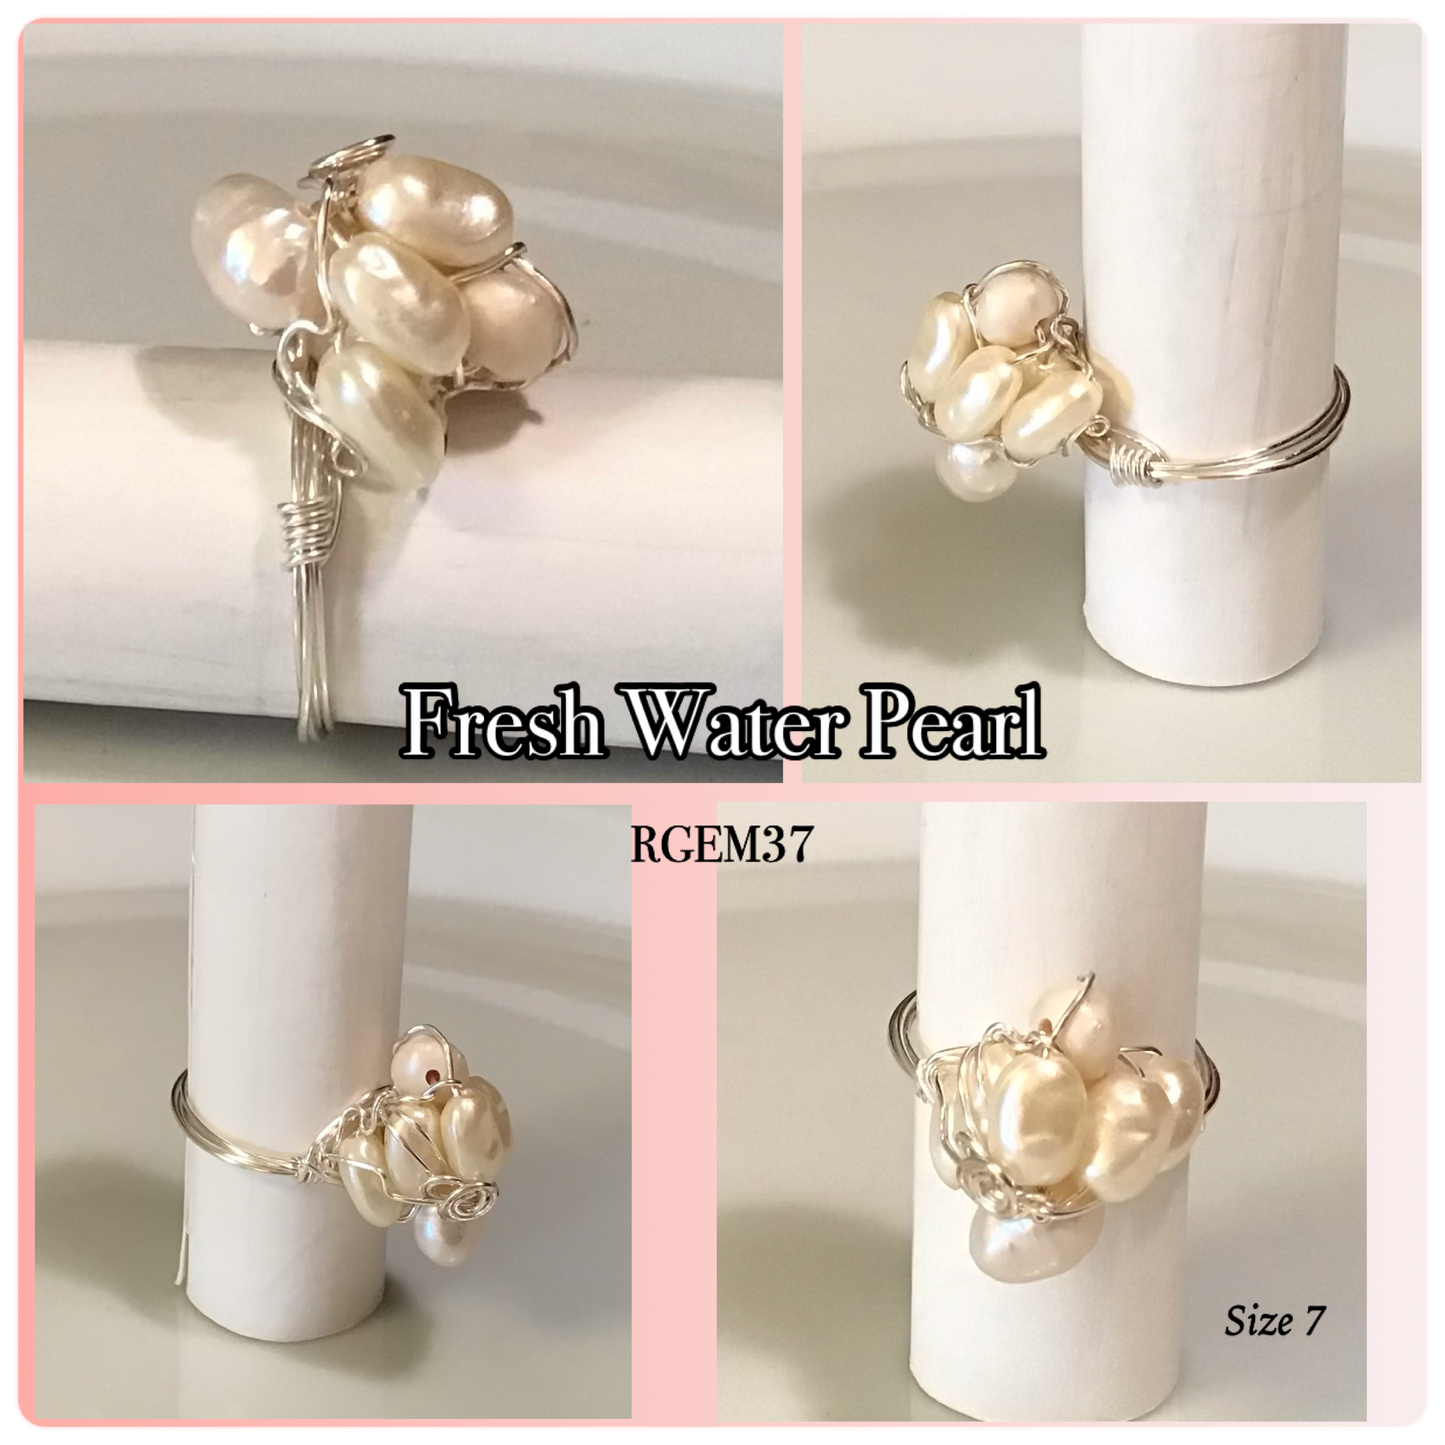 Fresh Water Pearl Ring, size 7, silver tone